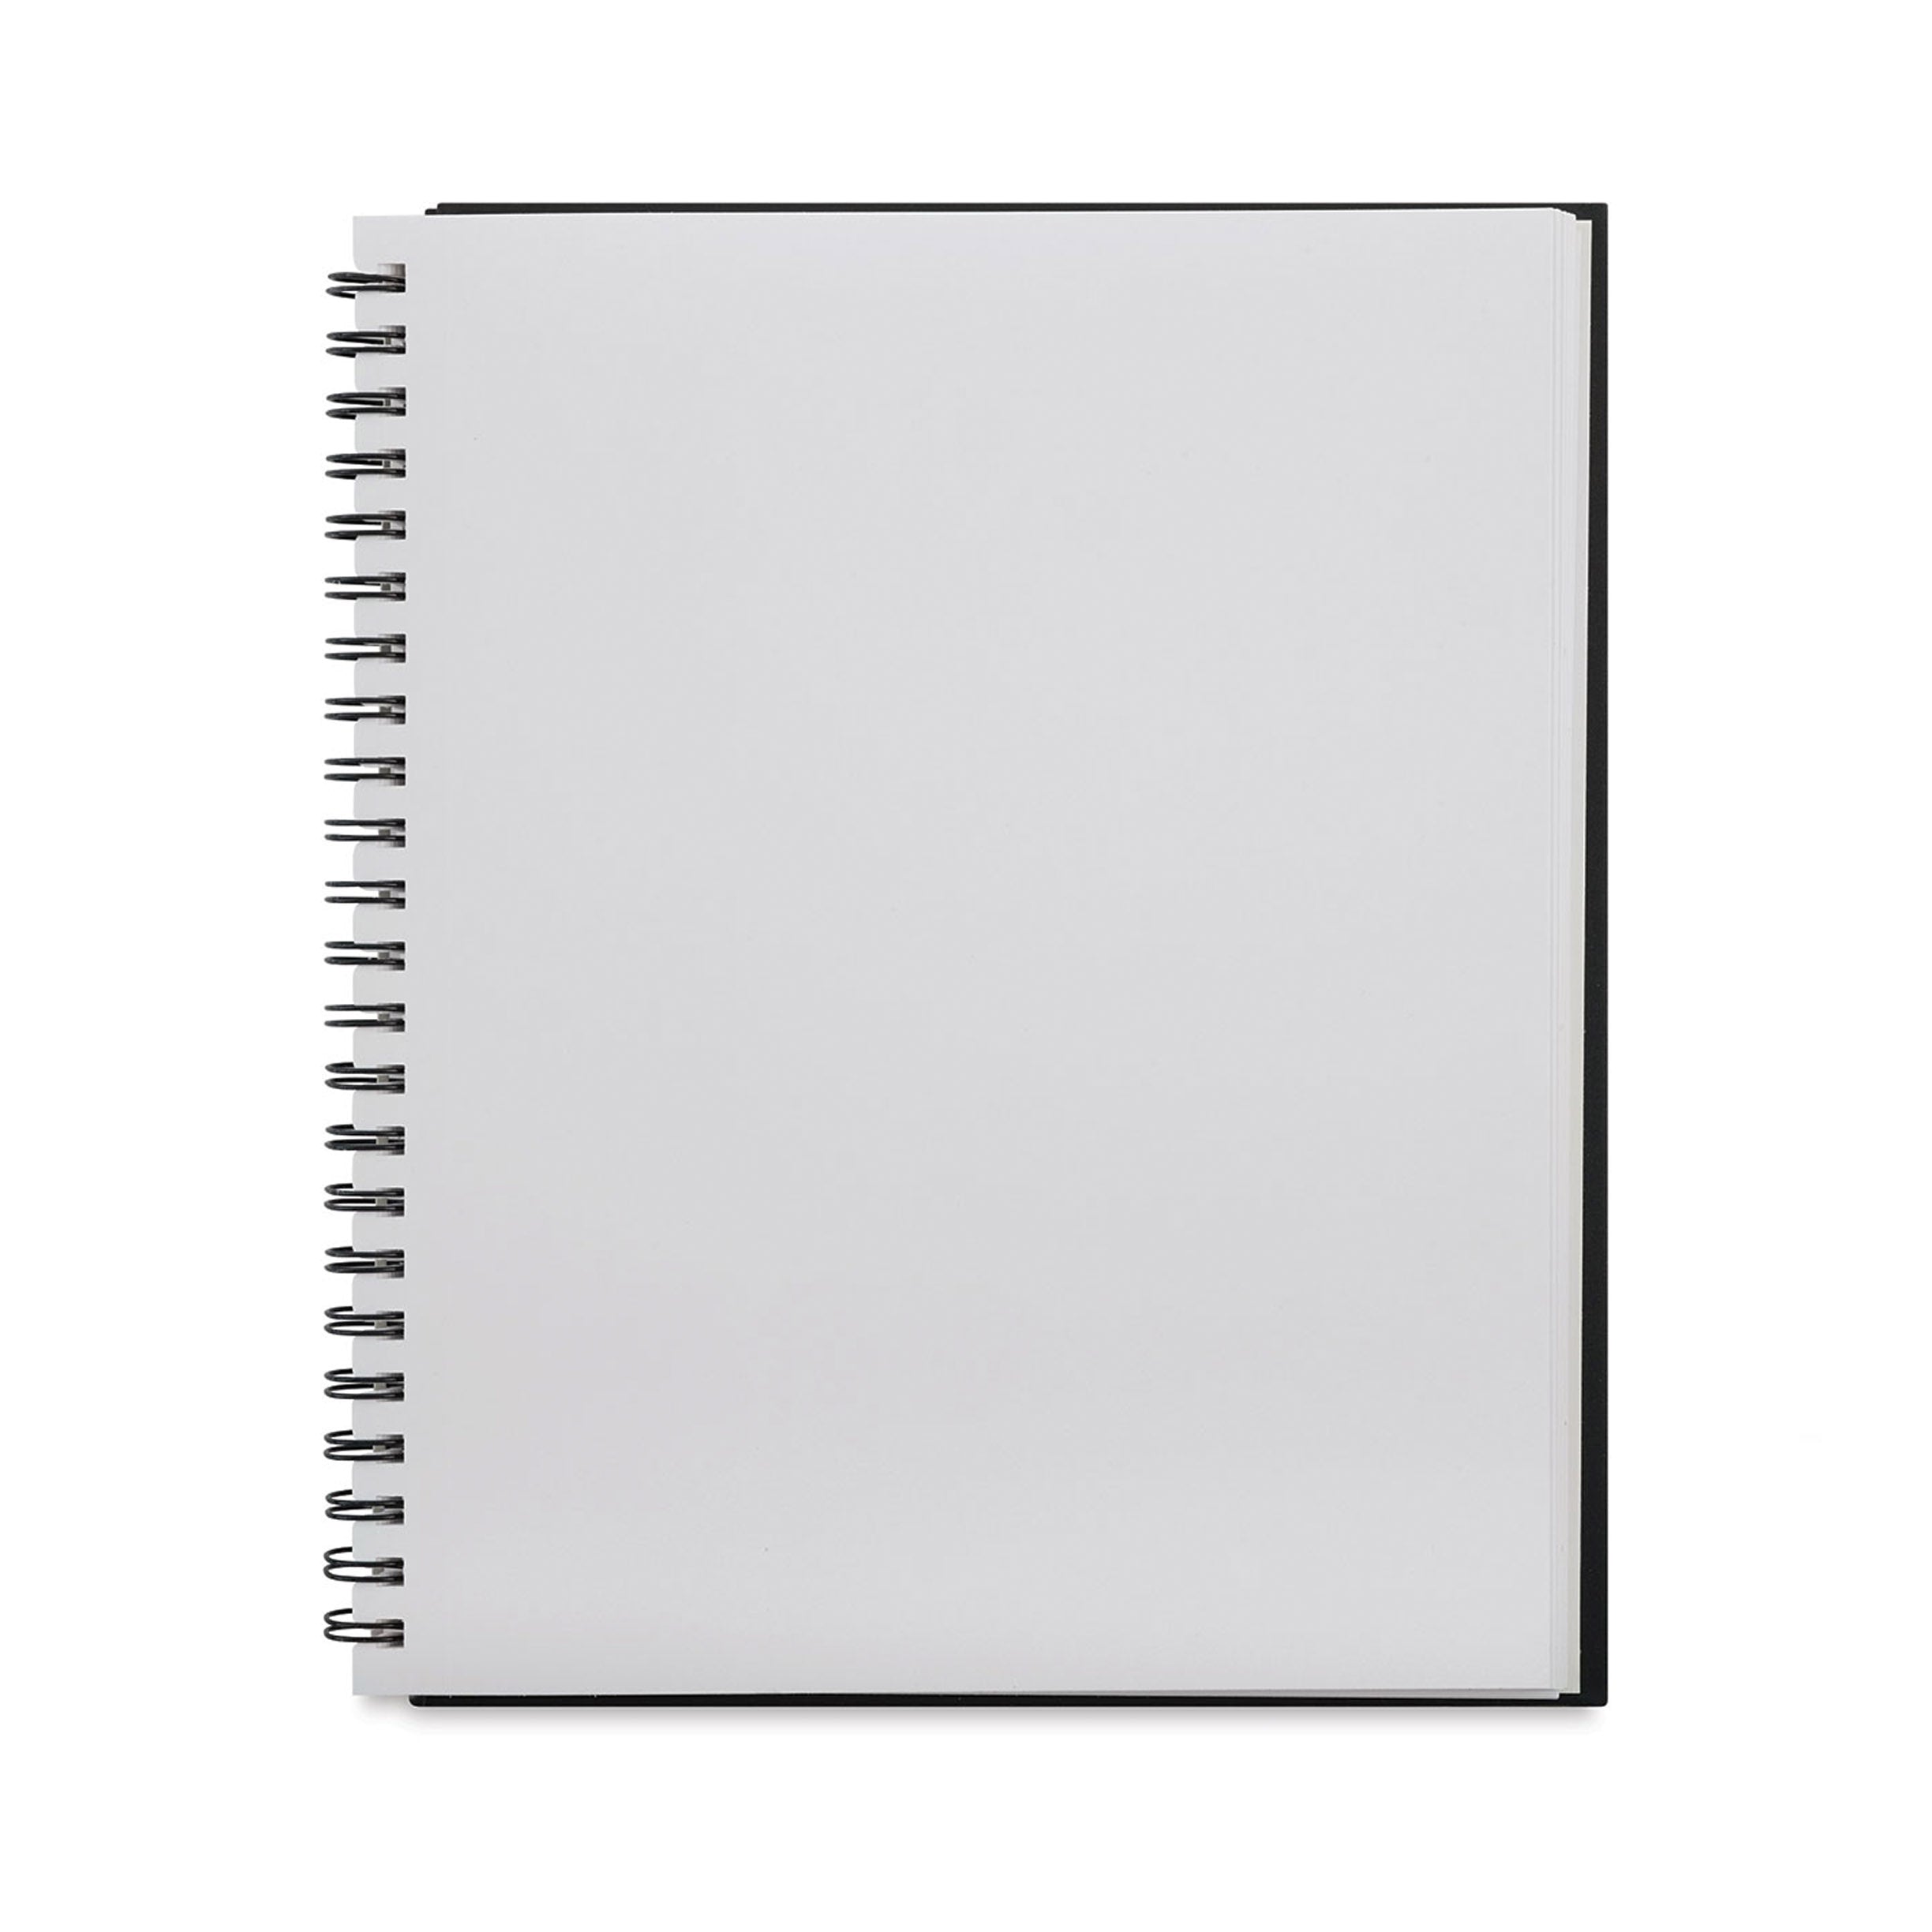 Blank Spiral Sketchbook with White Pages Against Colorful Abstract